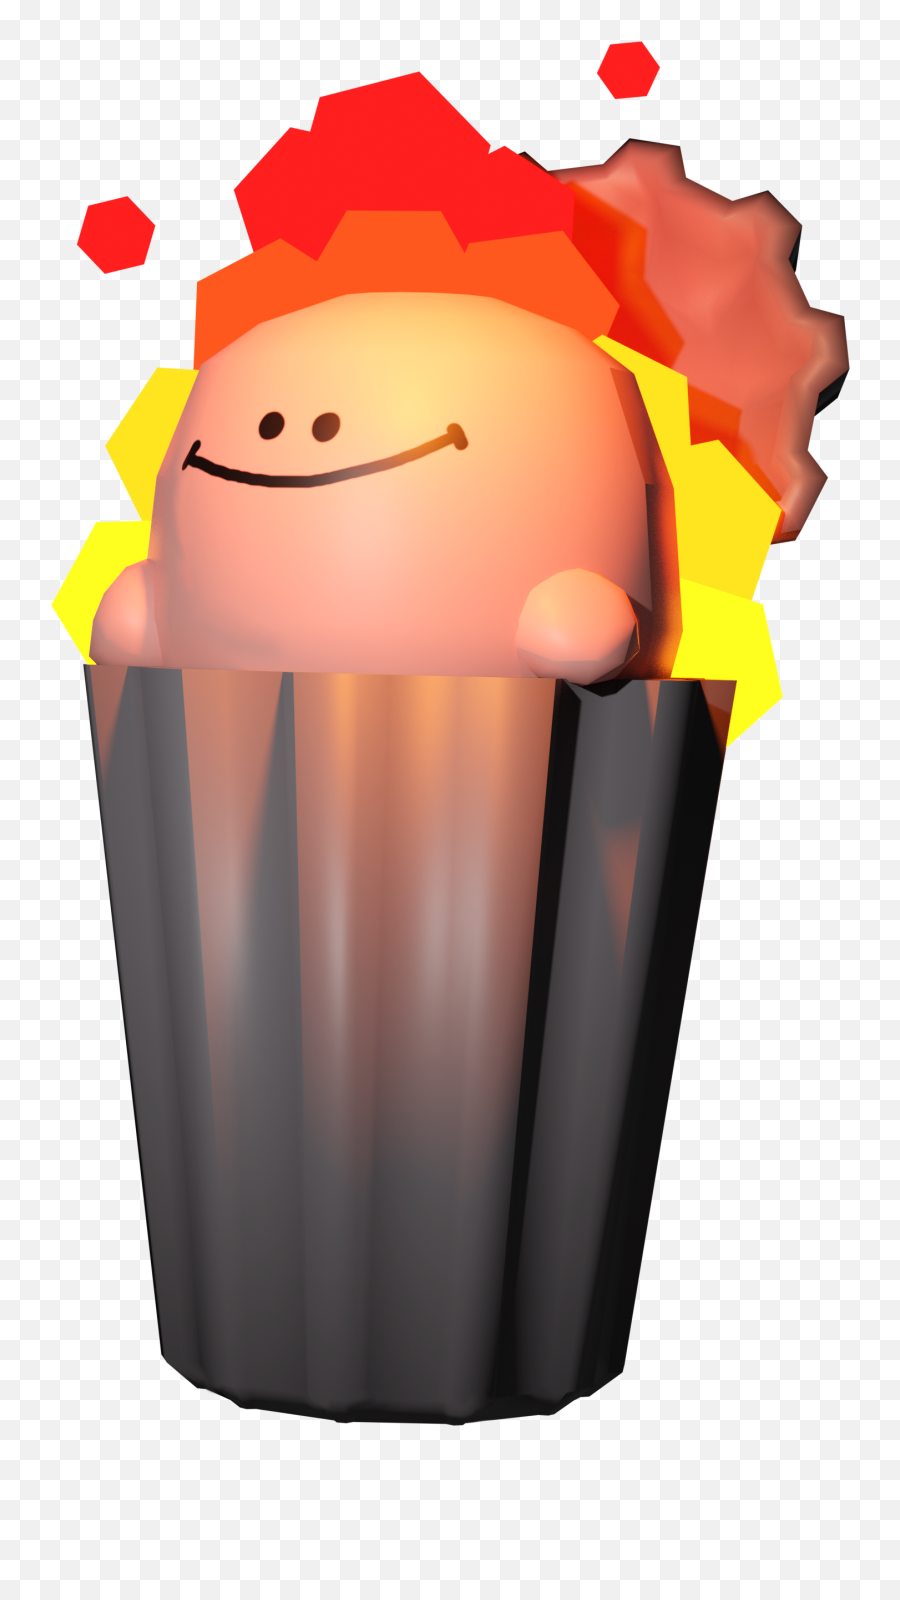 Dumpster Child - Roblox Tower Heroes Dumpster Child Png,Dumpster Png